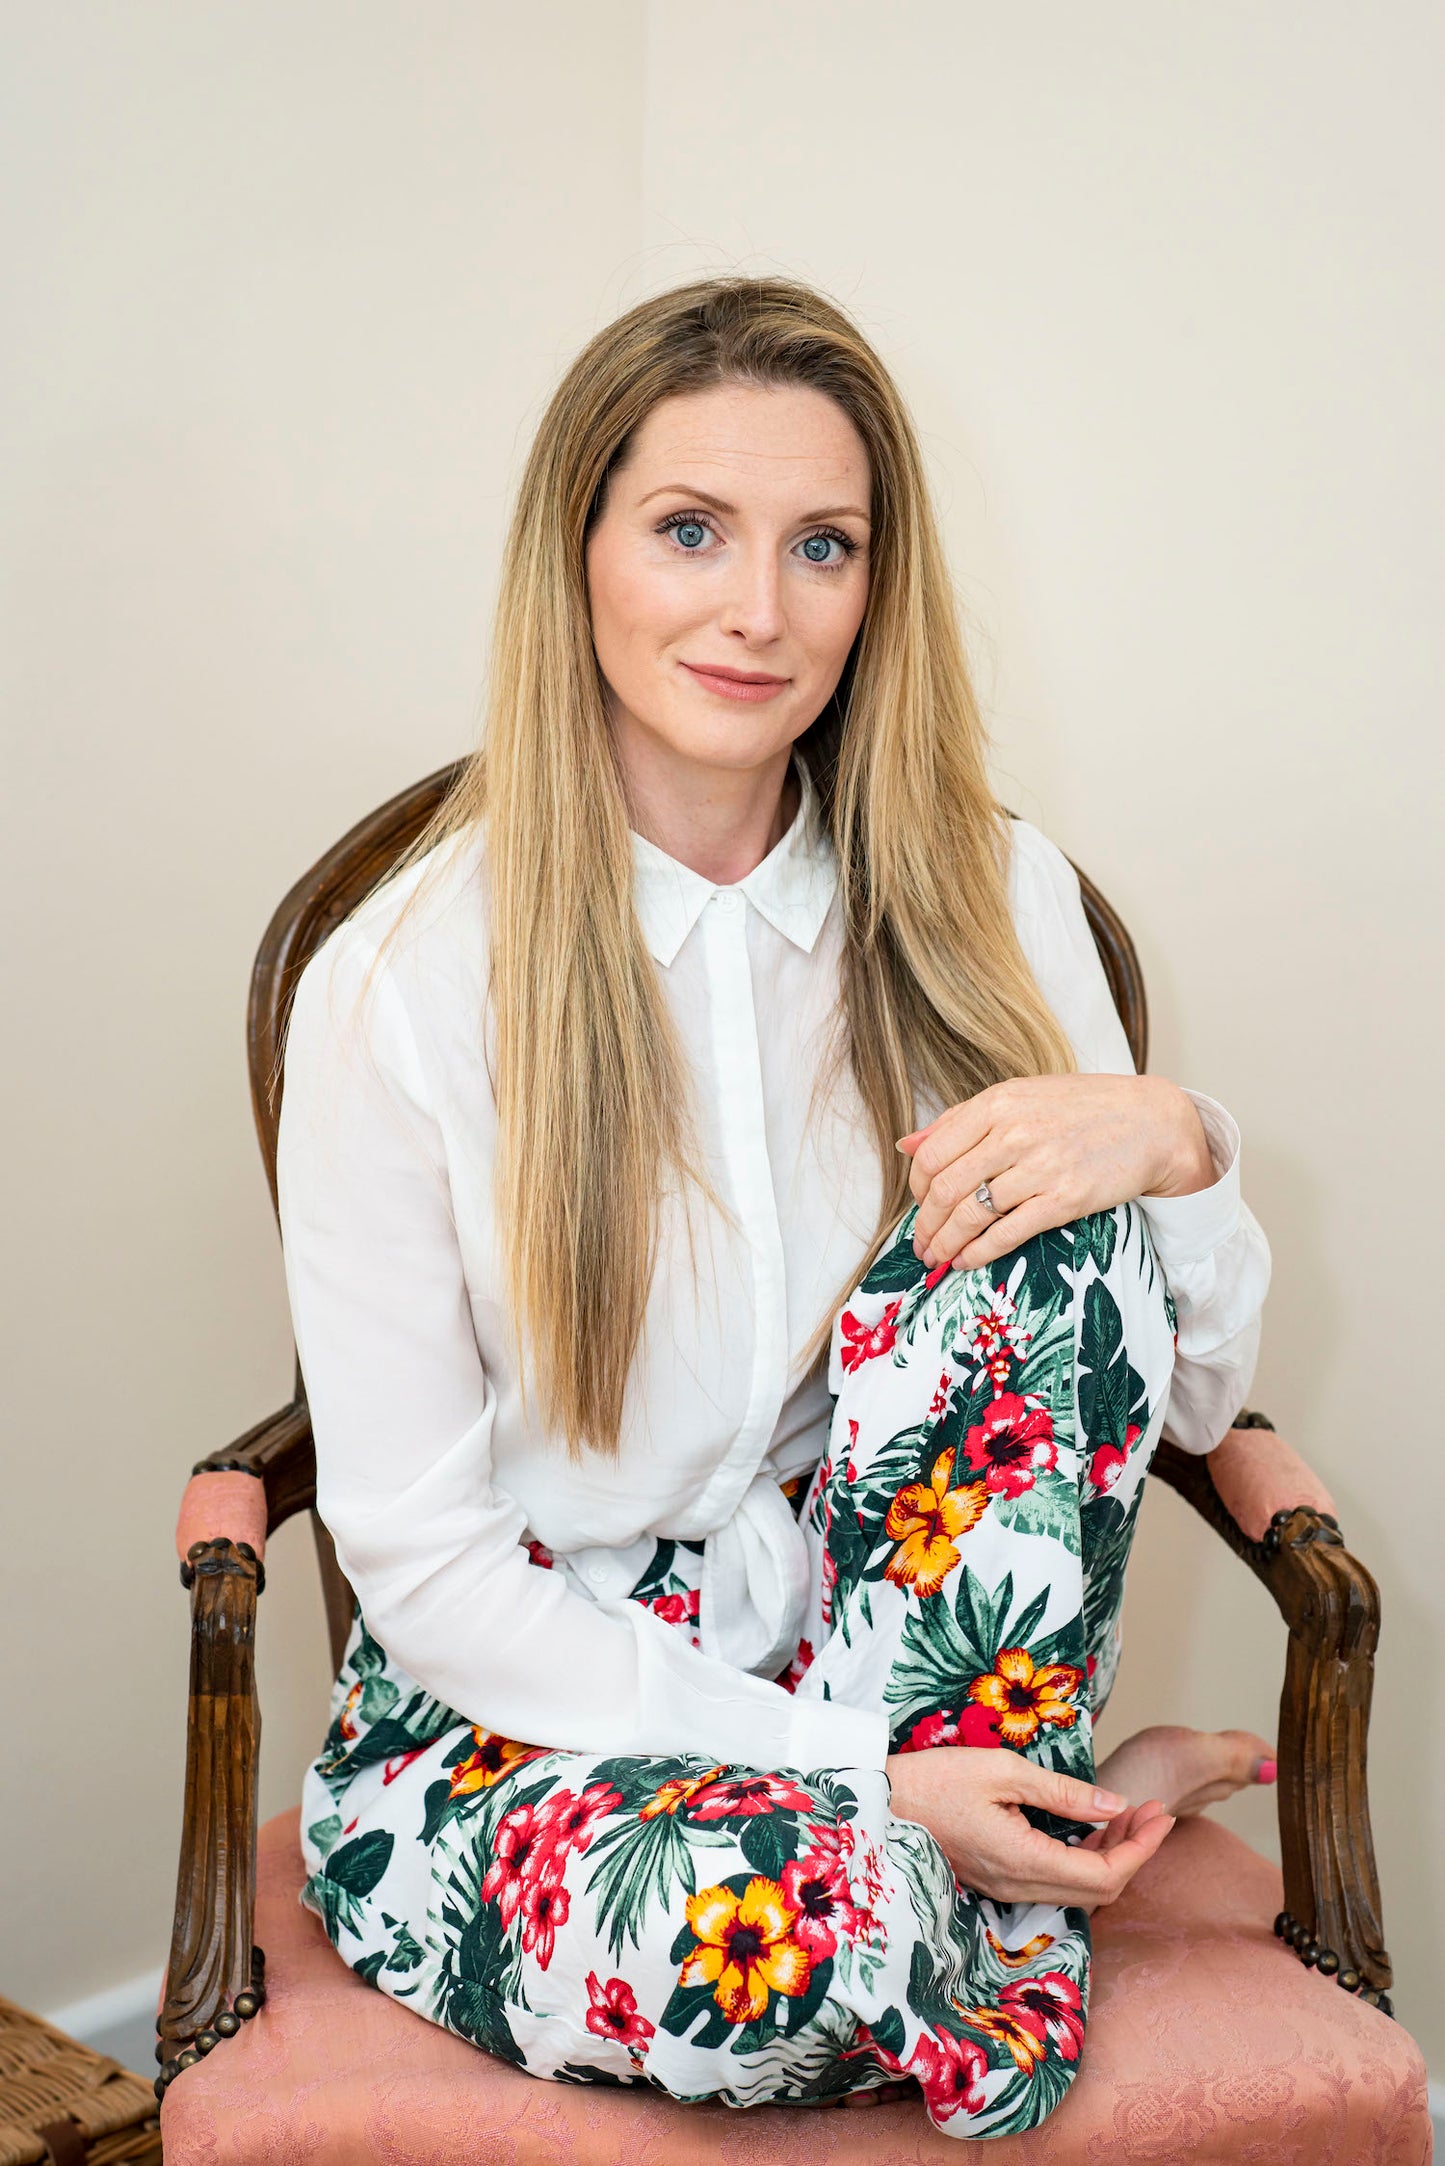 Bowe Organics Founder Diane is photographed sitting in a wooden chair with arm rests and a coral fabric. Diane has long blonde hair and bright blue eyes and she's seen with one leg raised up to her torso in a sitting position with her hand resting on her knee. Diane is wearing a white collared shirt and printed trousers with tropical flowers on them